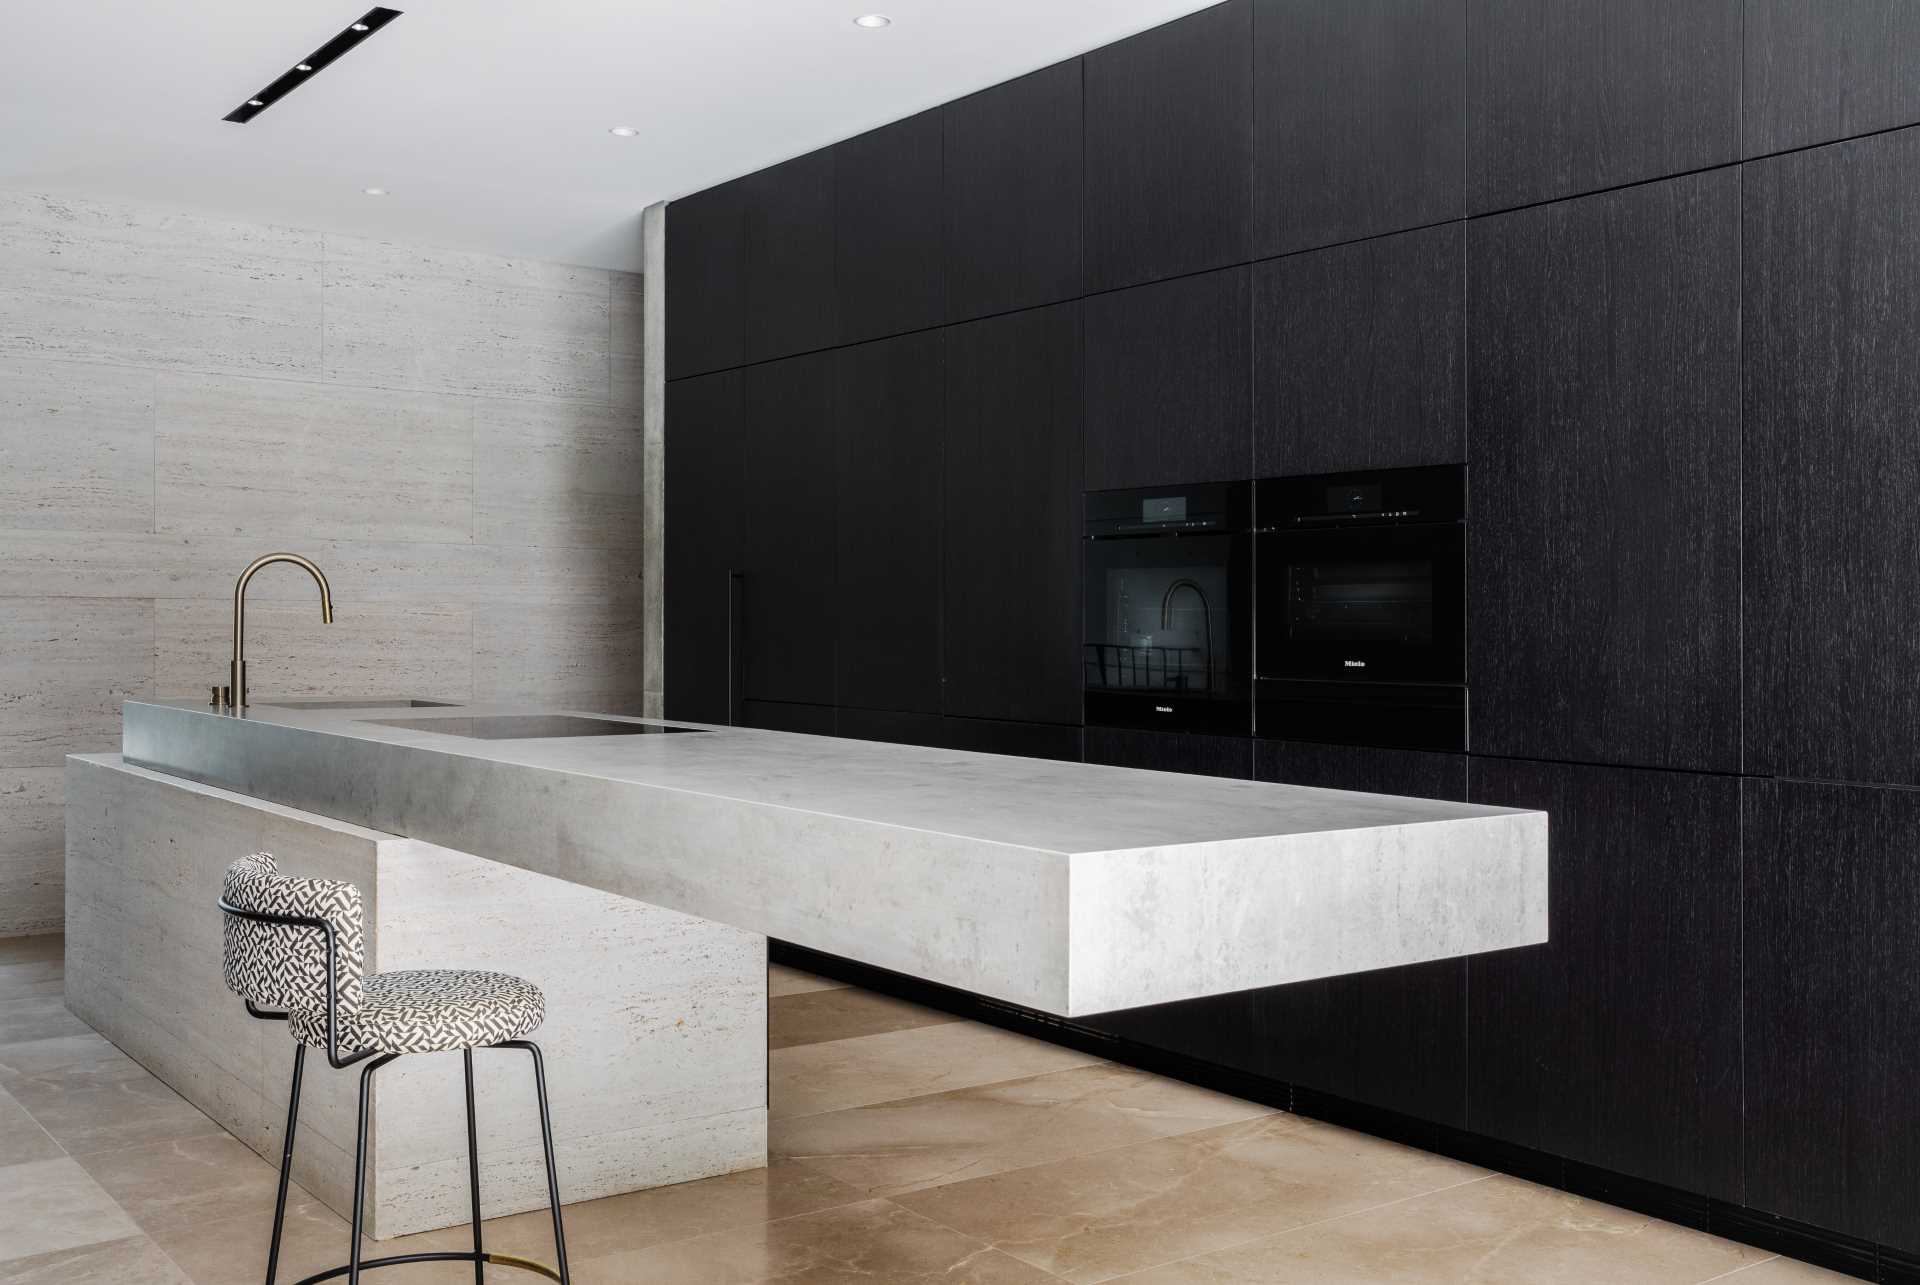 A minimalist kitchen with a cantilevered island.